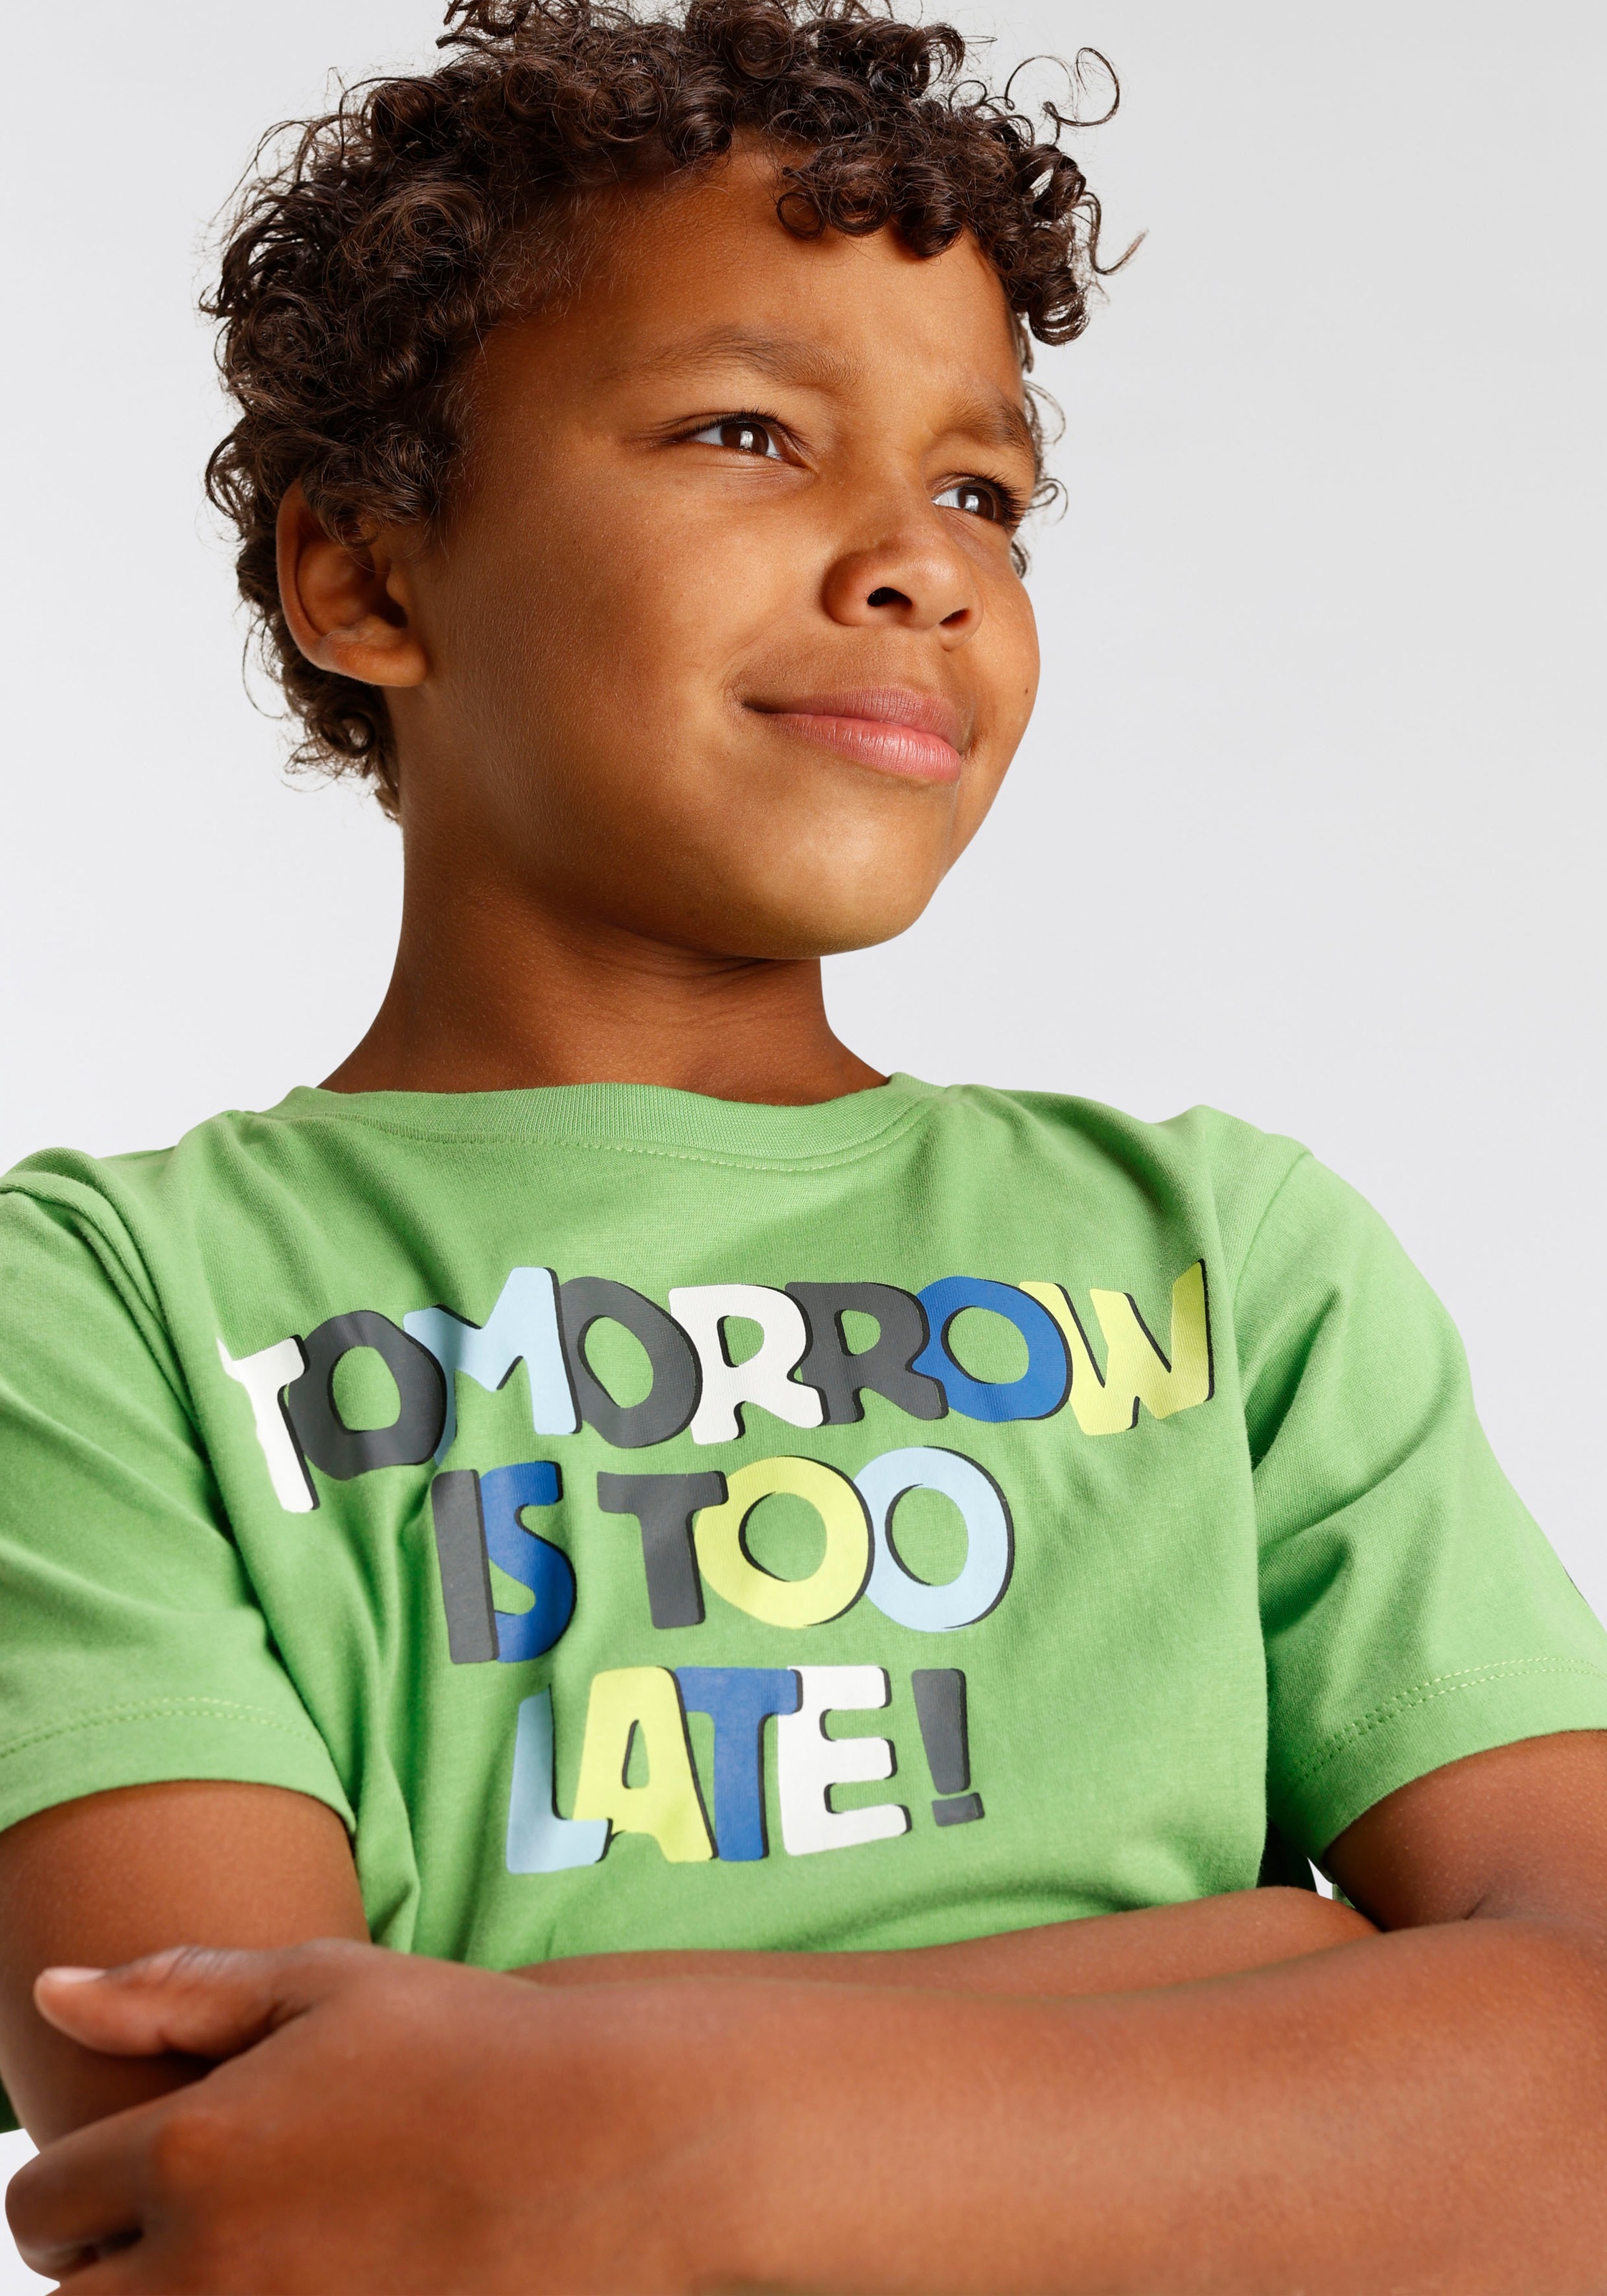 TOO bei LATE«, KIDSWORLD IS OTTO »TOMORROW Spruch T-Shirt